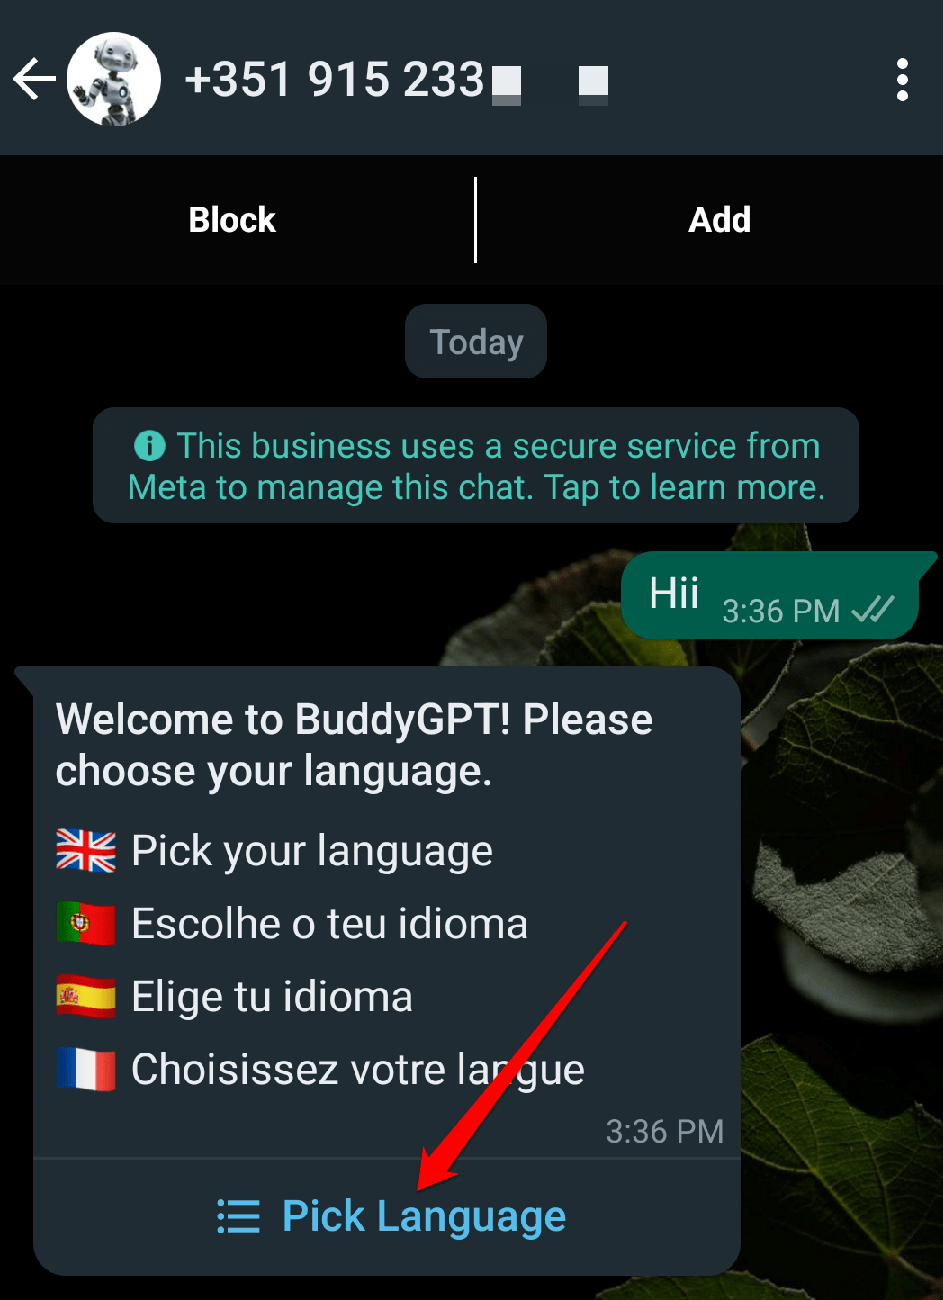 Type hi and pick your language.